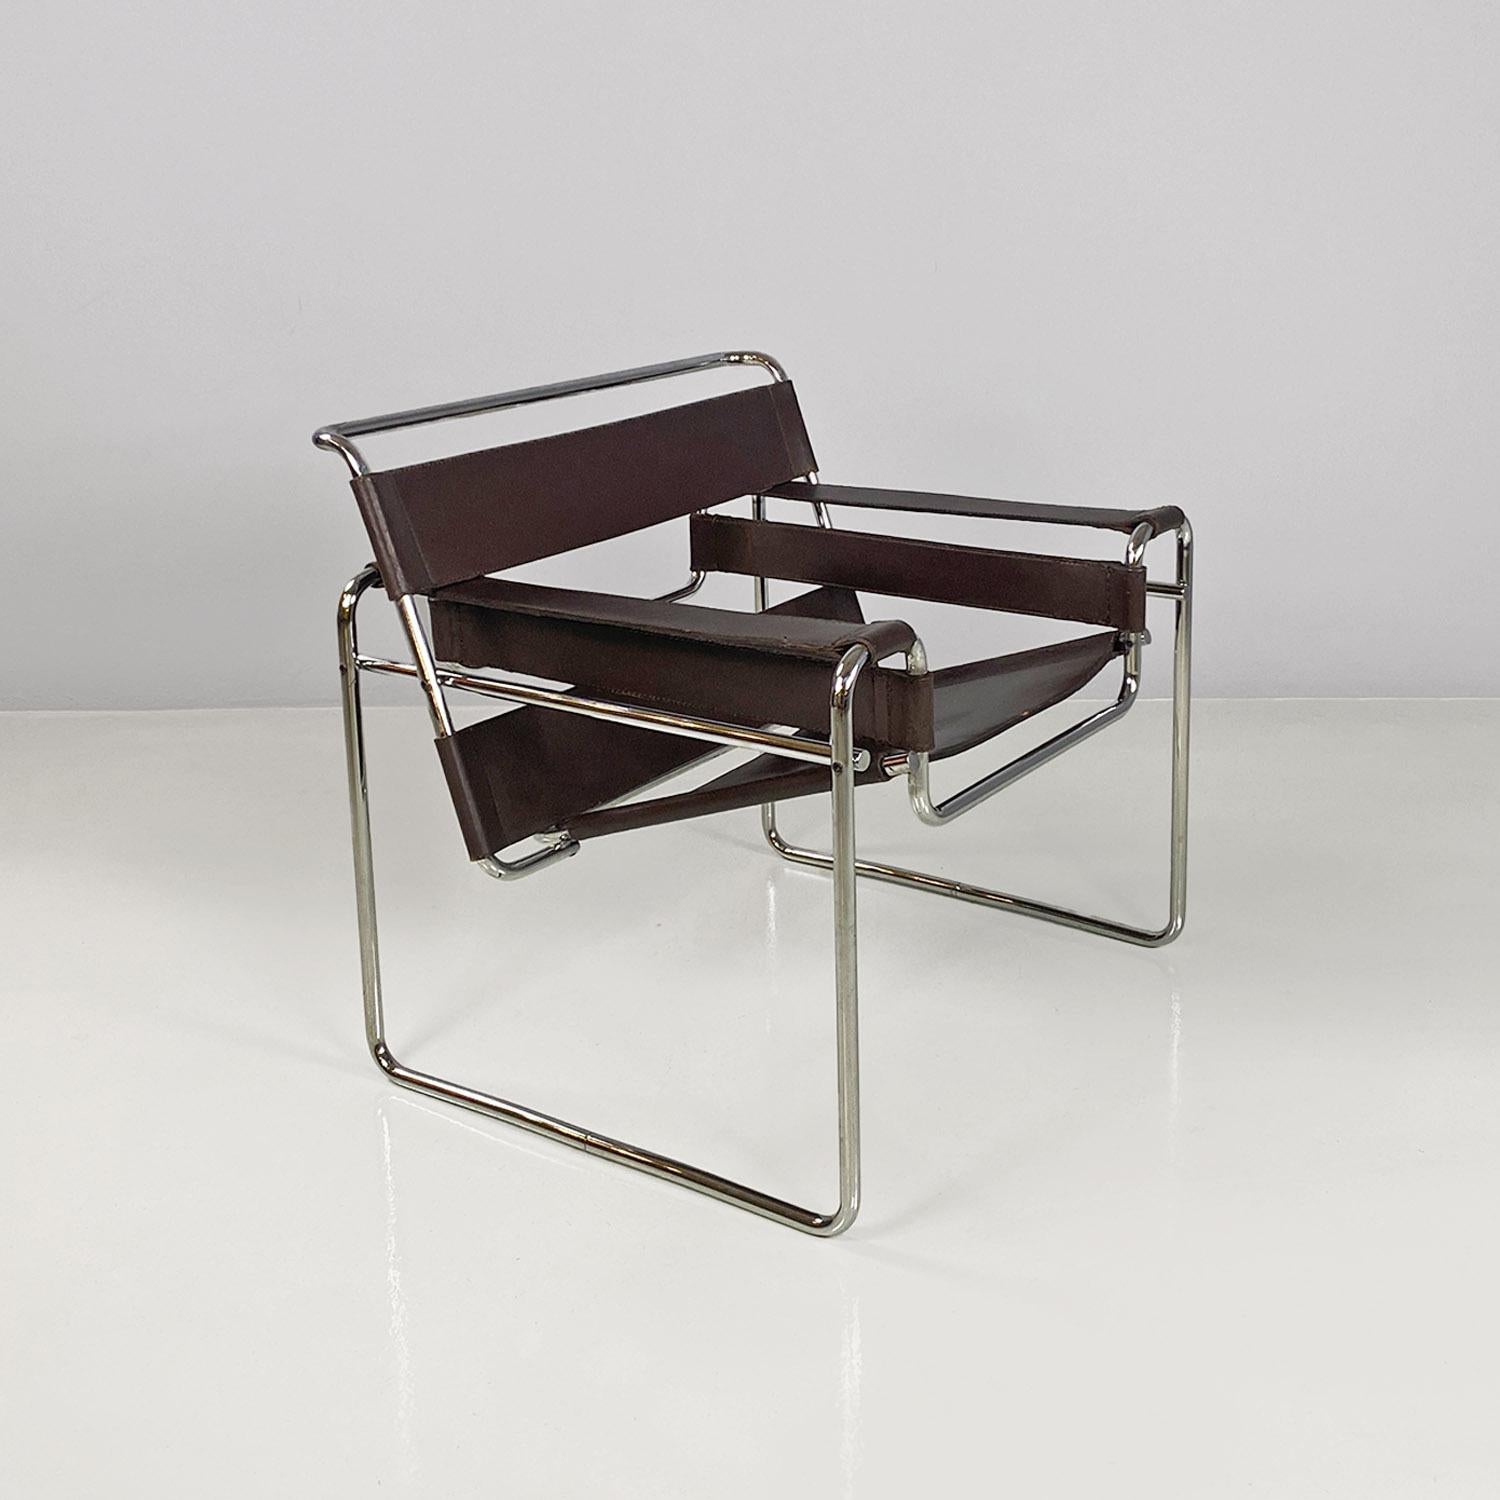 Iconic Italian modern brown leather Wassily armchair by Marcel Breuer for Gavina, 1970s
Wassily or B3 model armchair, with chromed tubular steel structure. The seat, armrests and backrest are made up of bands entirely in dark brown leather, with